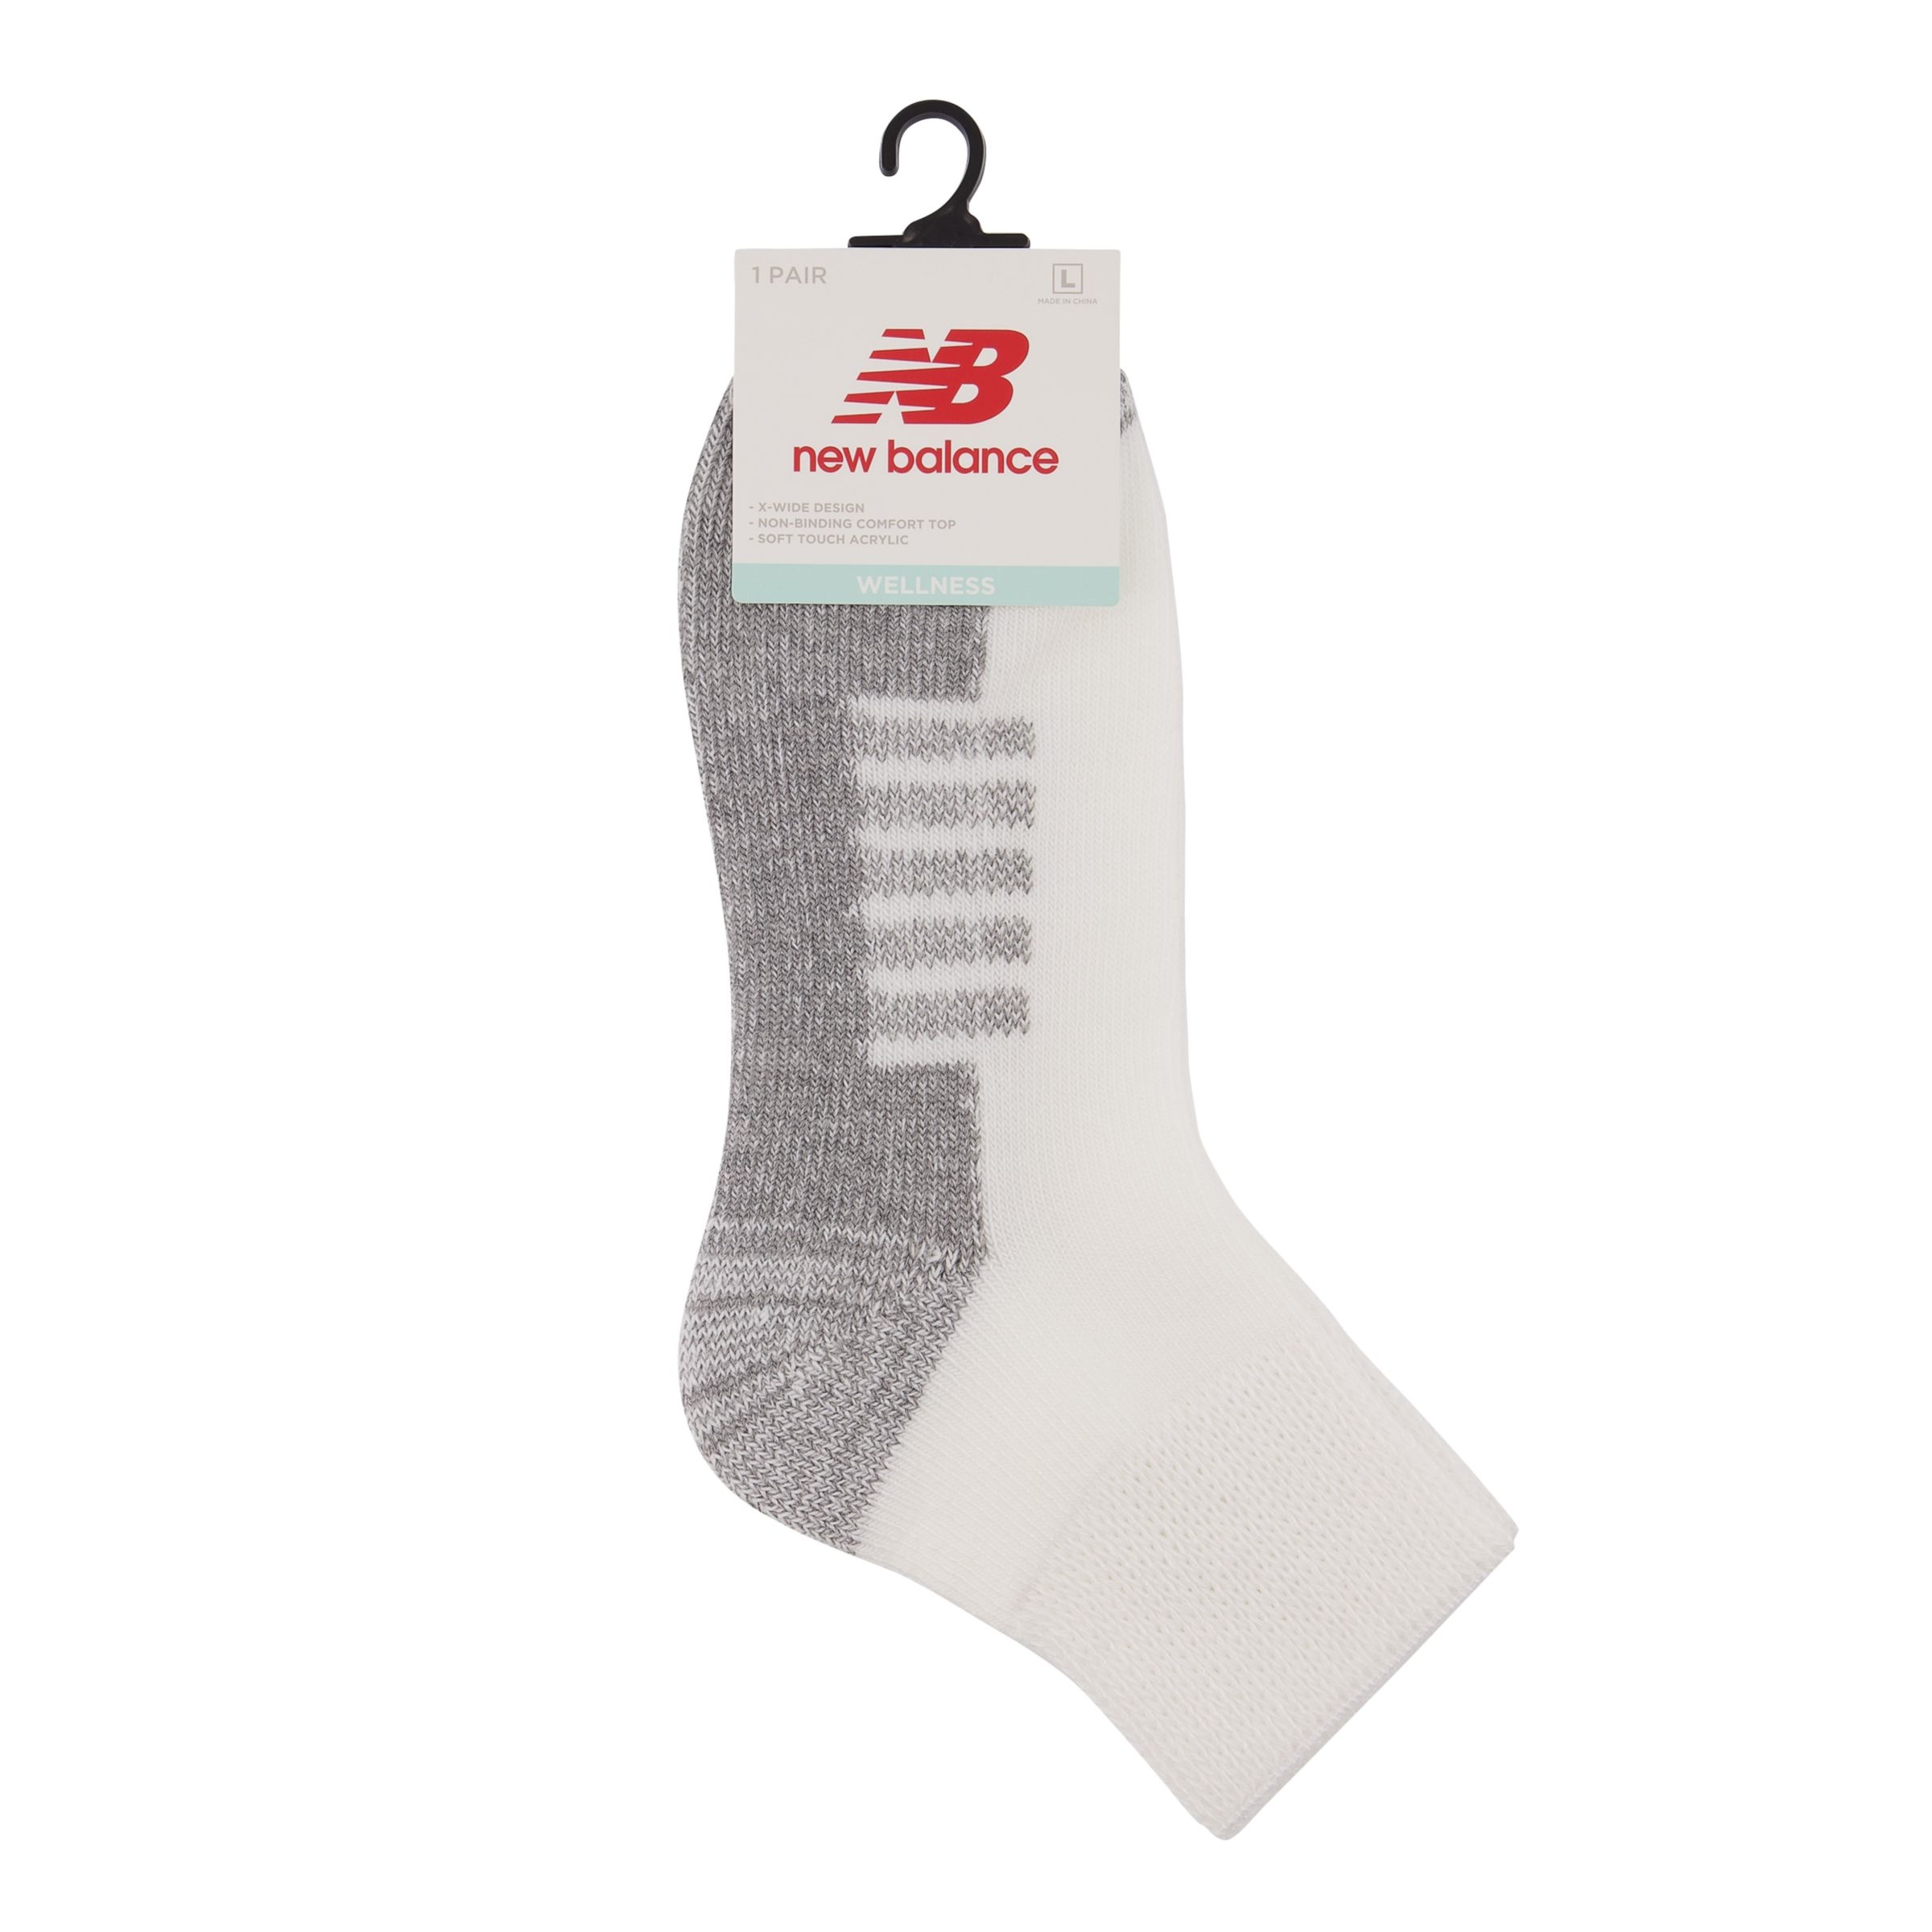 X-Wide Wellness Ankle Sock 1 Pair - 2